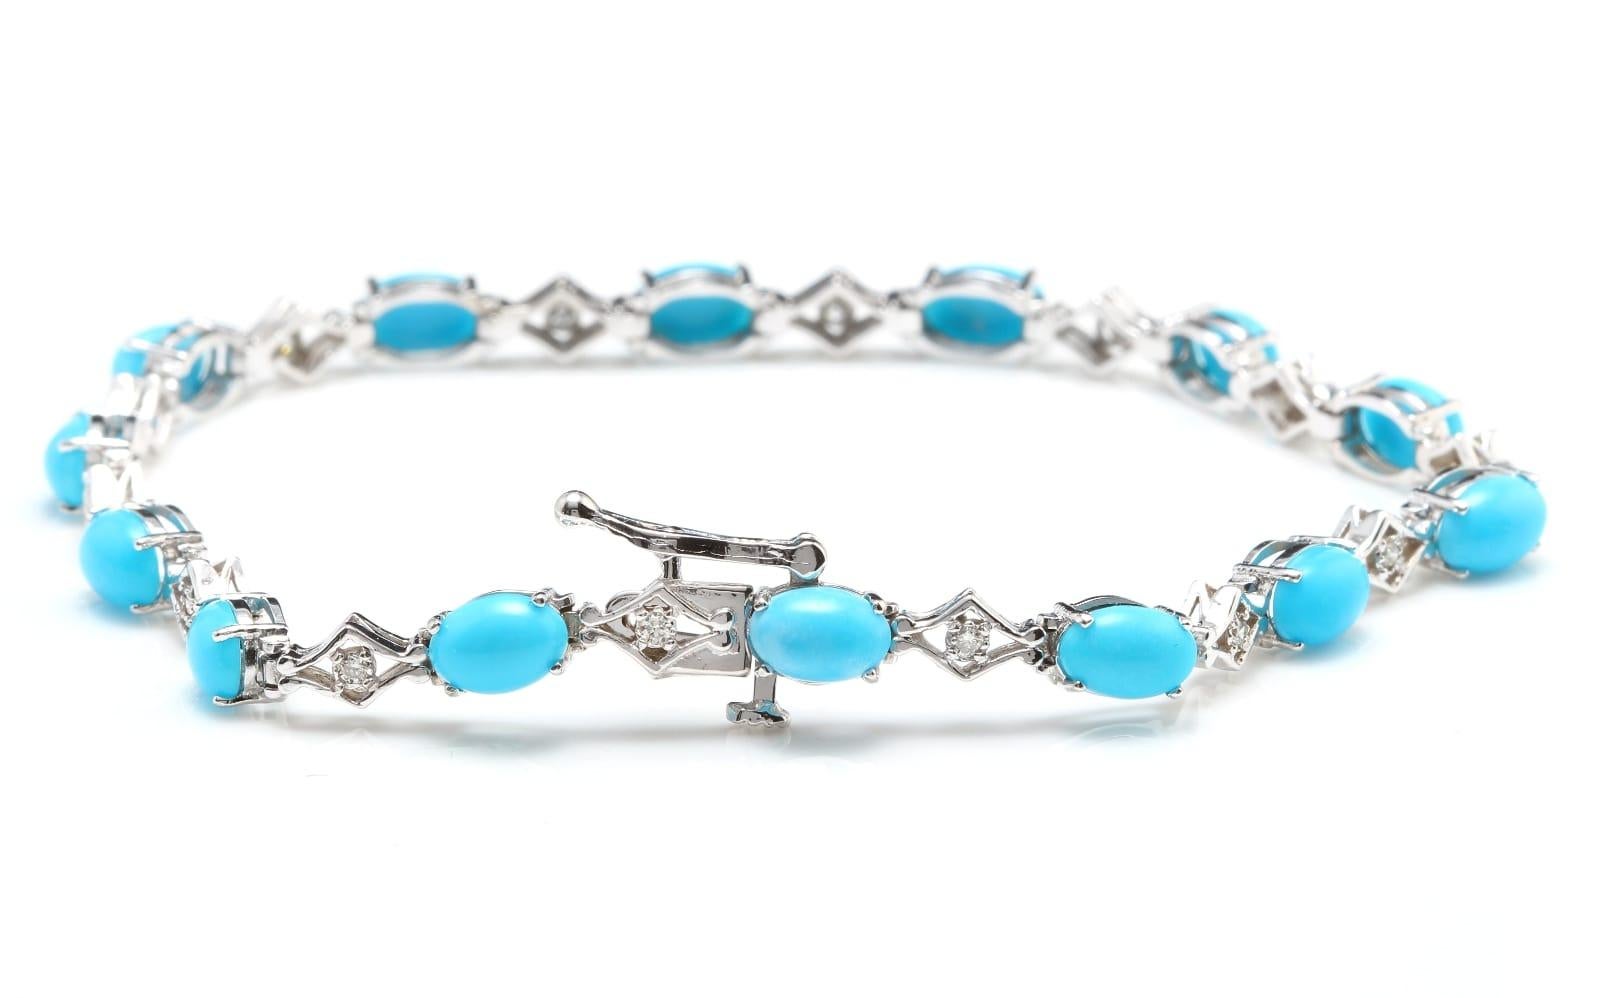 Very Impressive 6.20 Carats Natural Turquoise & Diamond 14K Solid White Gold Bracelet 

Suggested Replacement Value: $5,500.00

STAMPED: 14K

Total Natural Round Diamonds Weight: Approx. 0.20 Carats (color G-H / Clarity SI1-Si2)

Total Natural